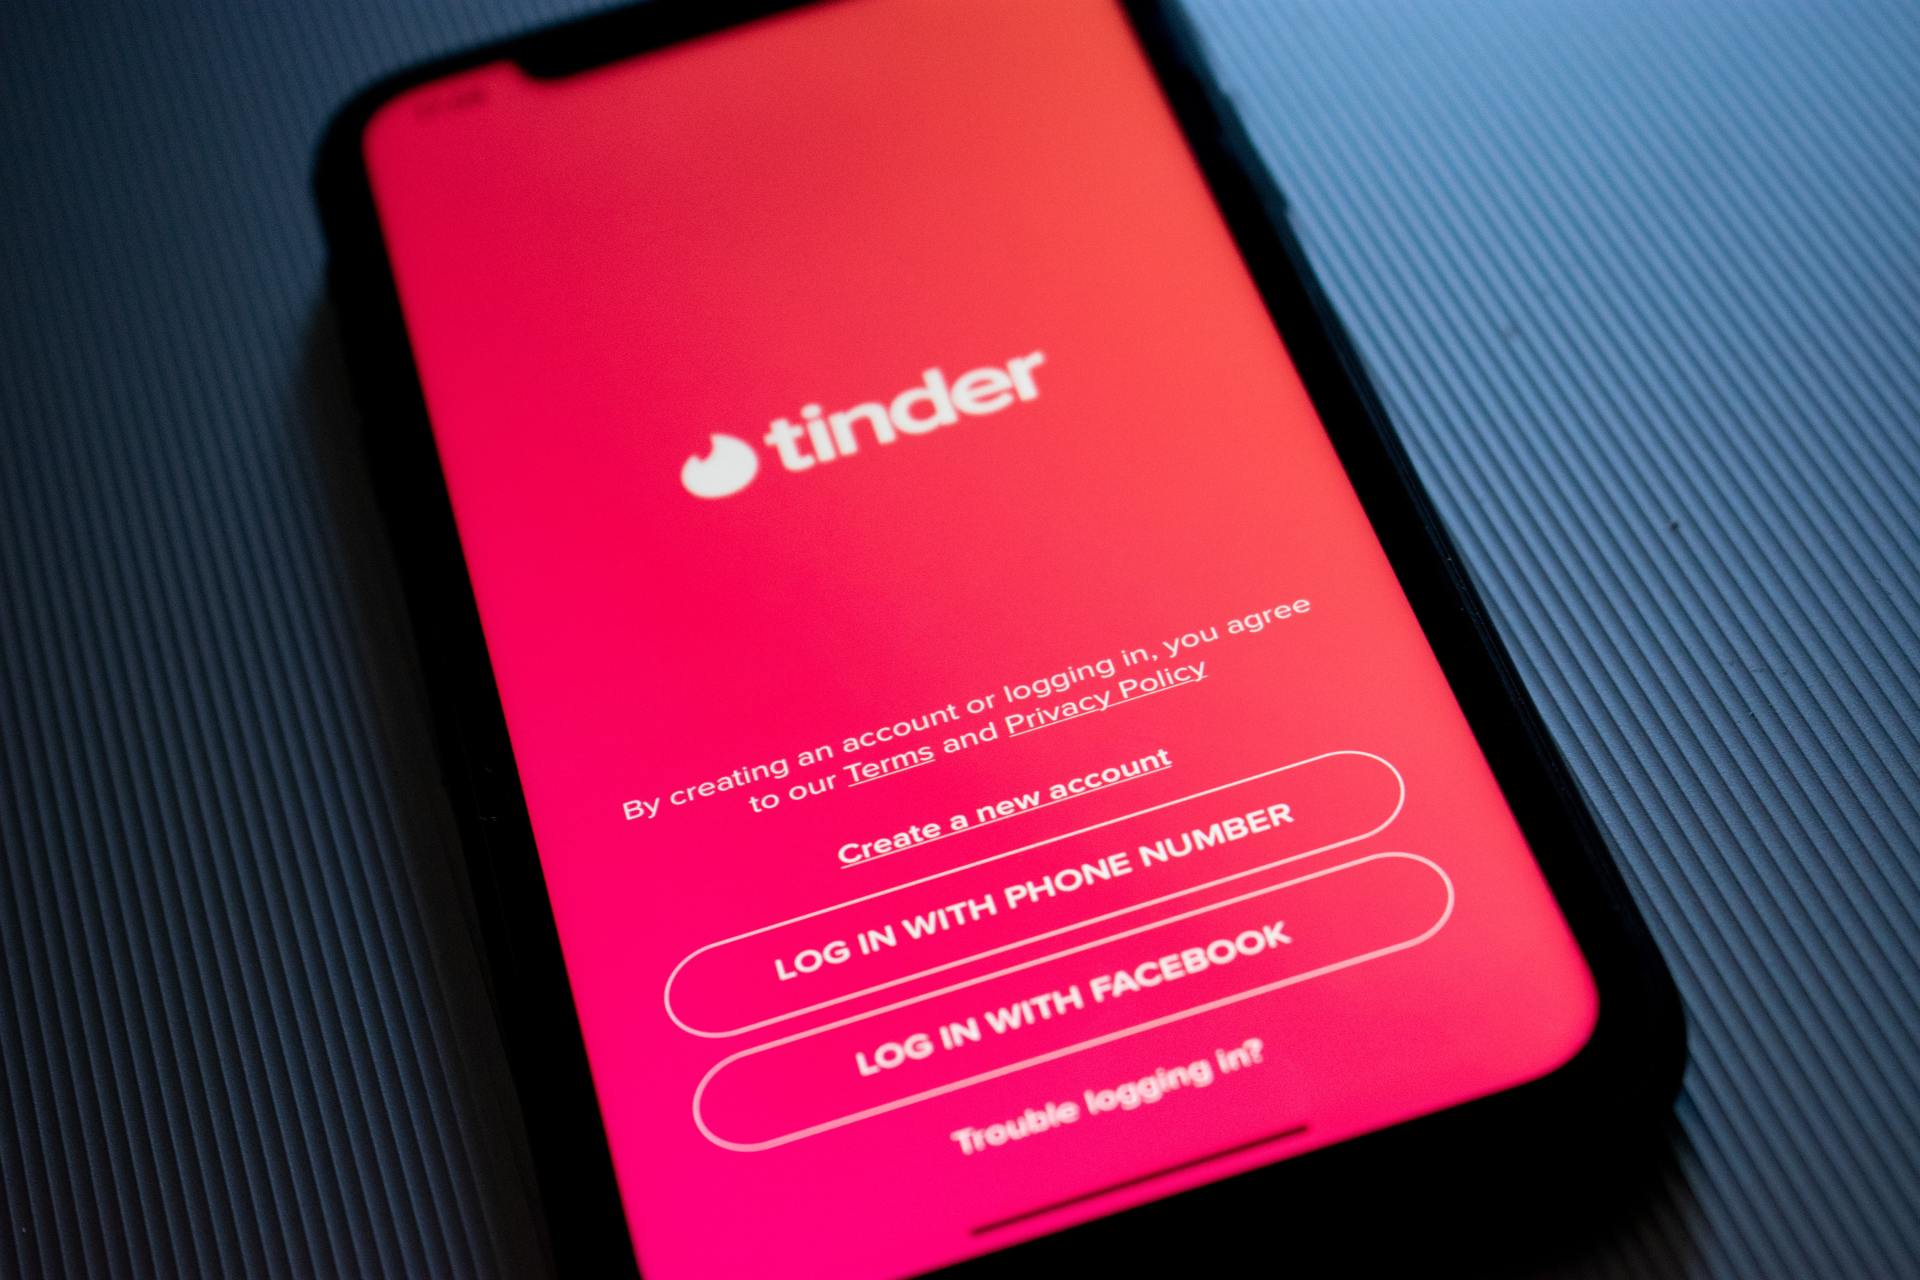 50+ Tinder Conversation Starters (Or Bumble, Coffee Meets Bagel & More)  [2020] | Thought Catalog